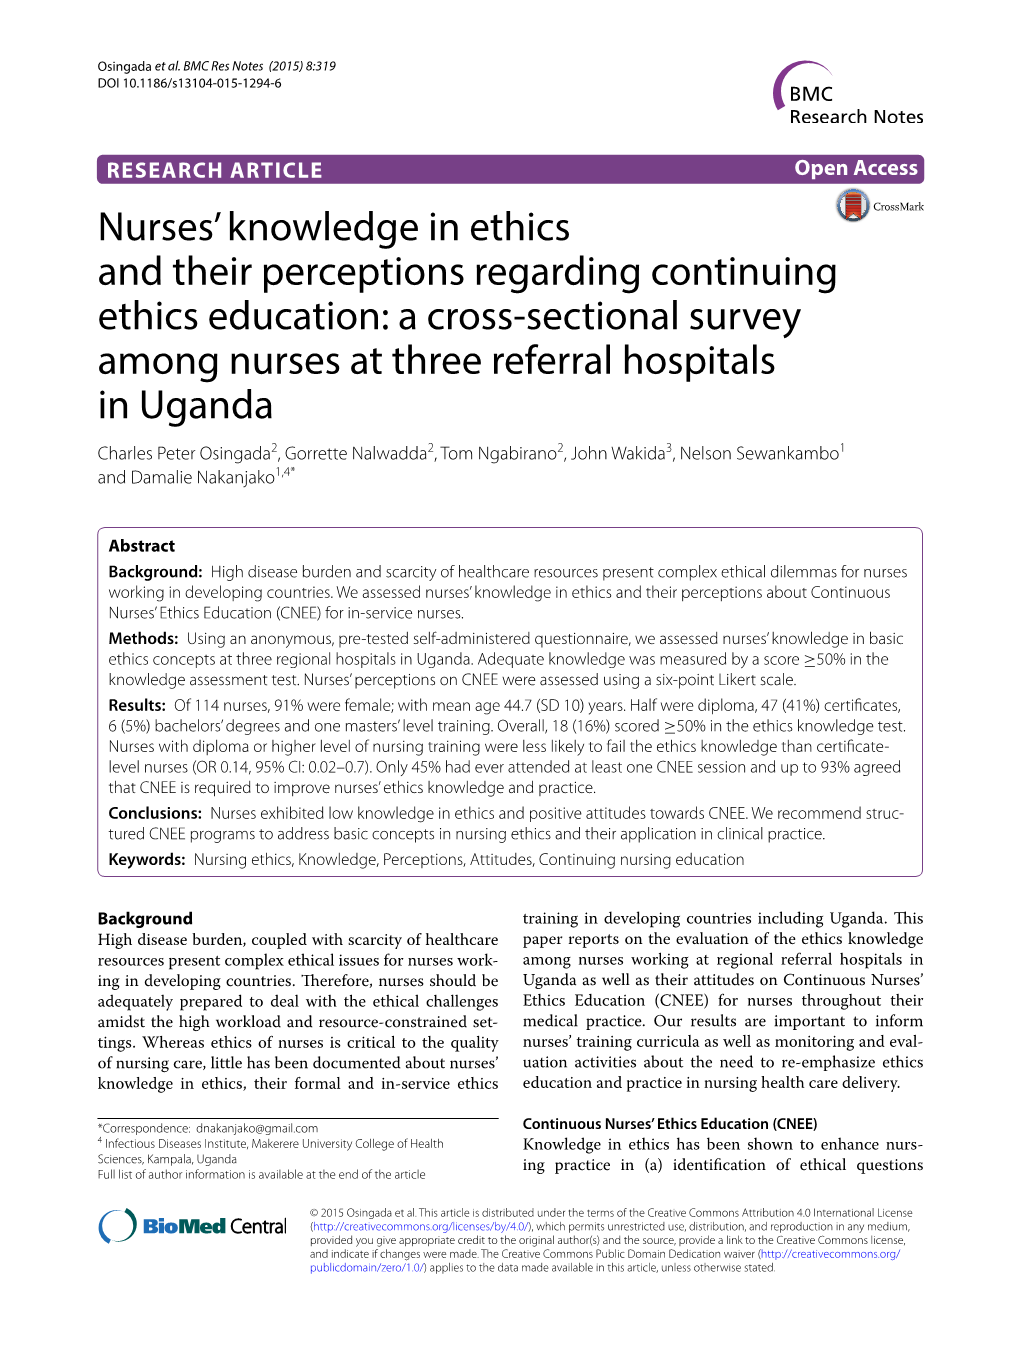 Nurses' Knowledge in Ethics and Their Perceptions Regarding Continuing